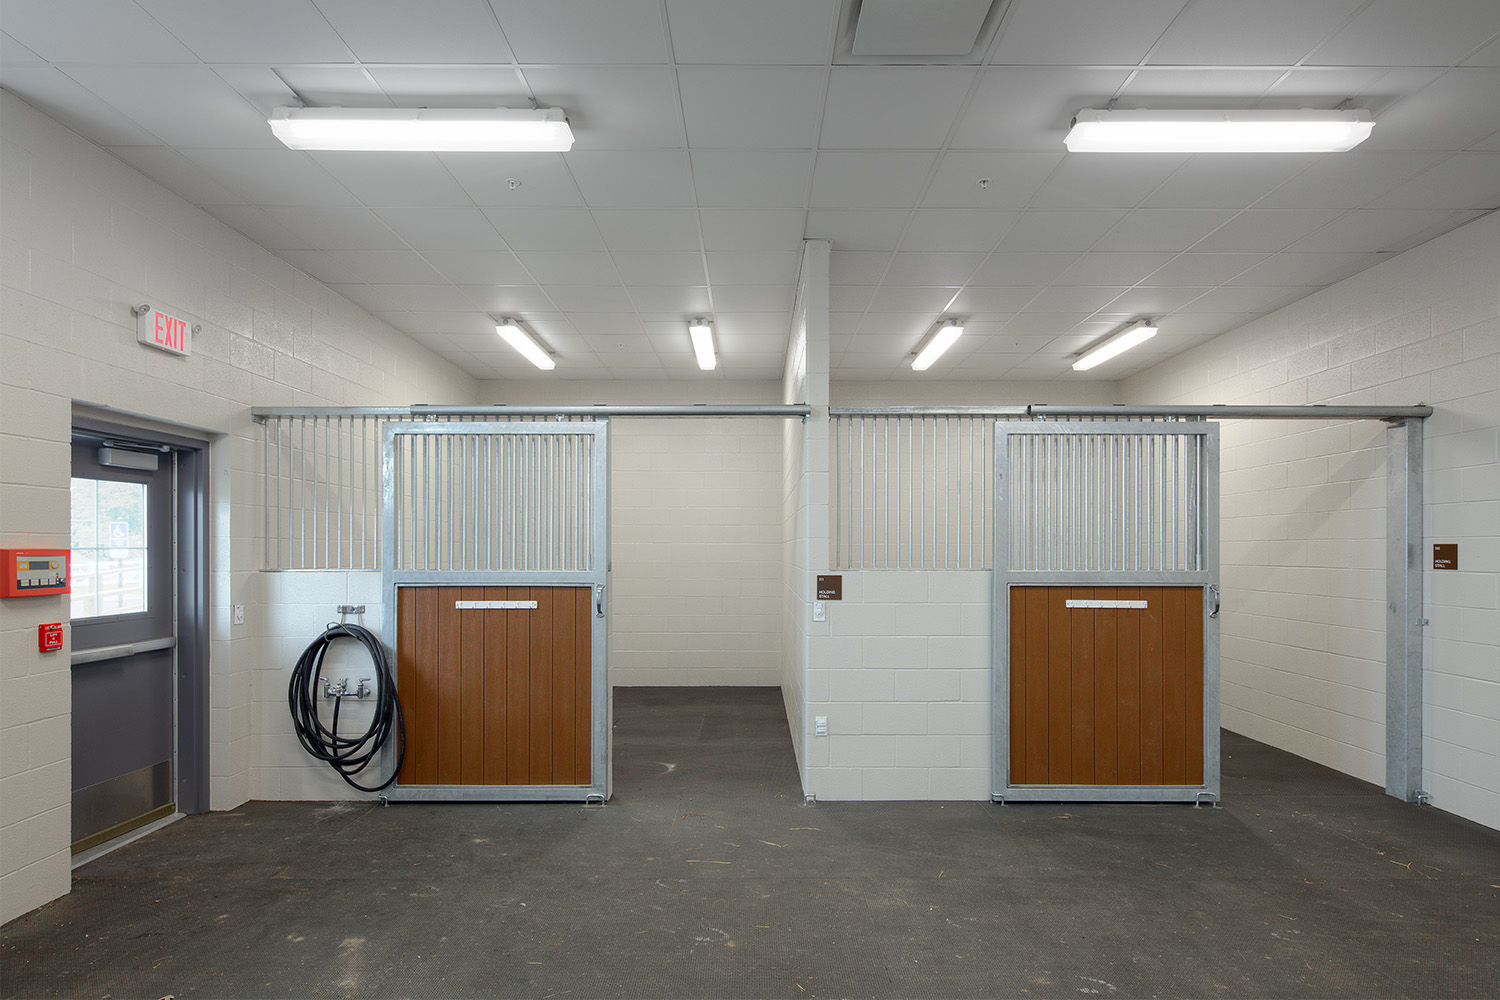 two unoccupied holding stalls for horses